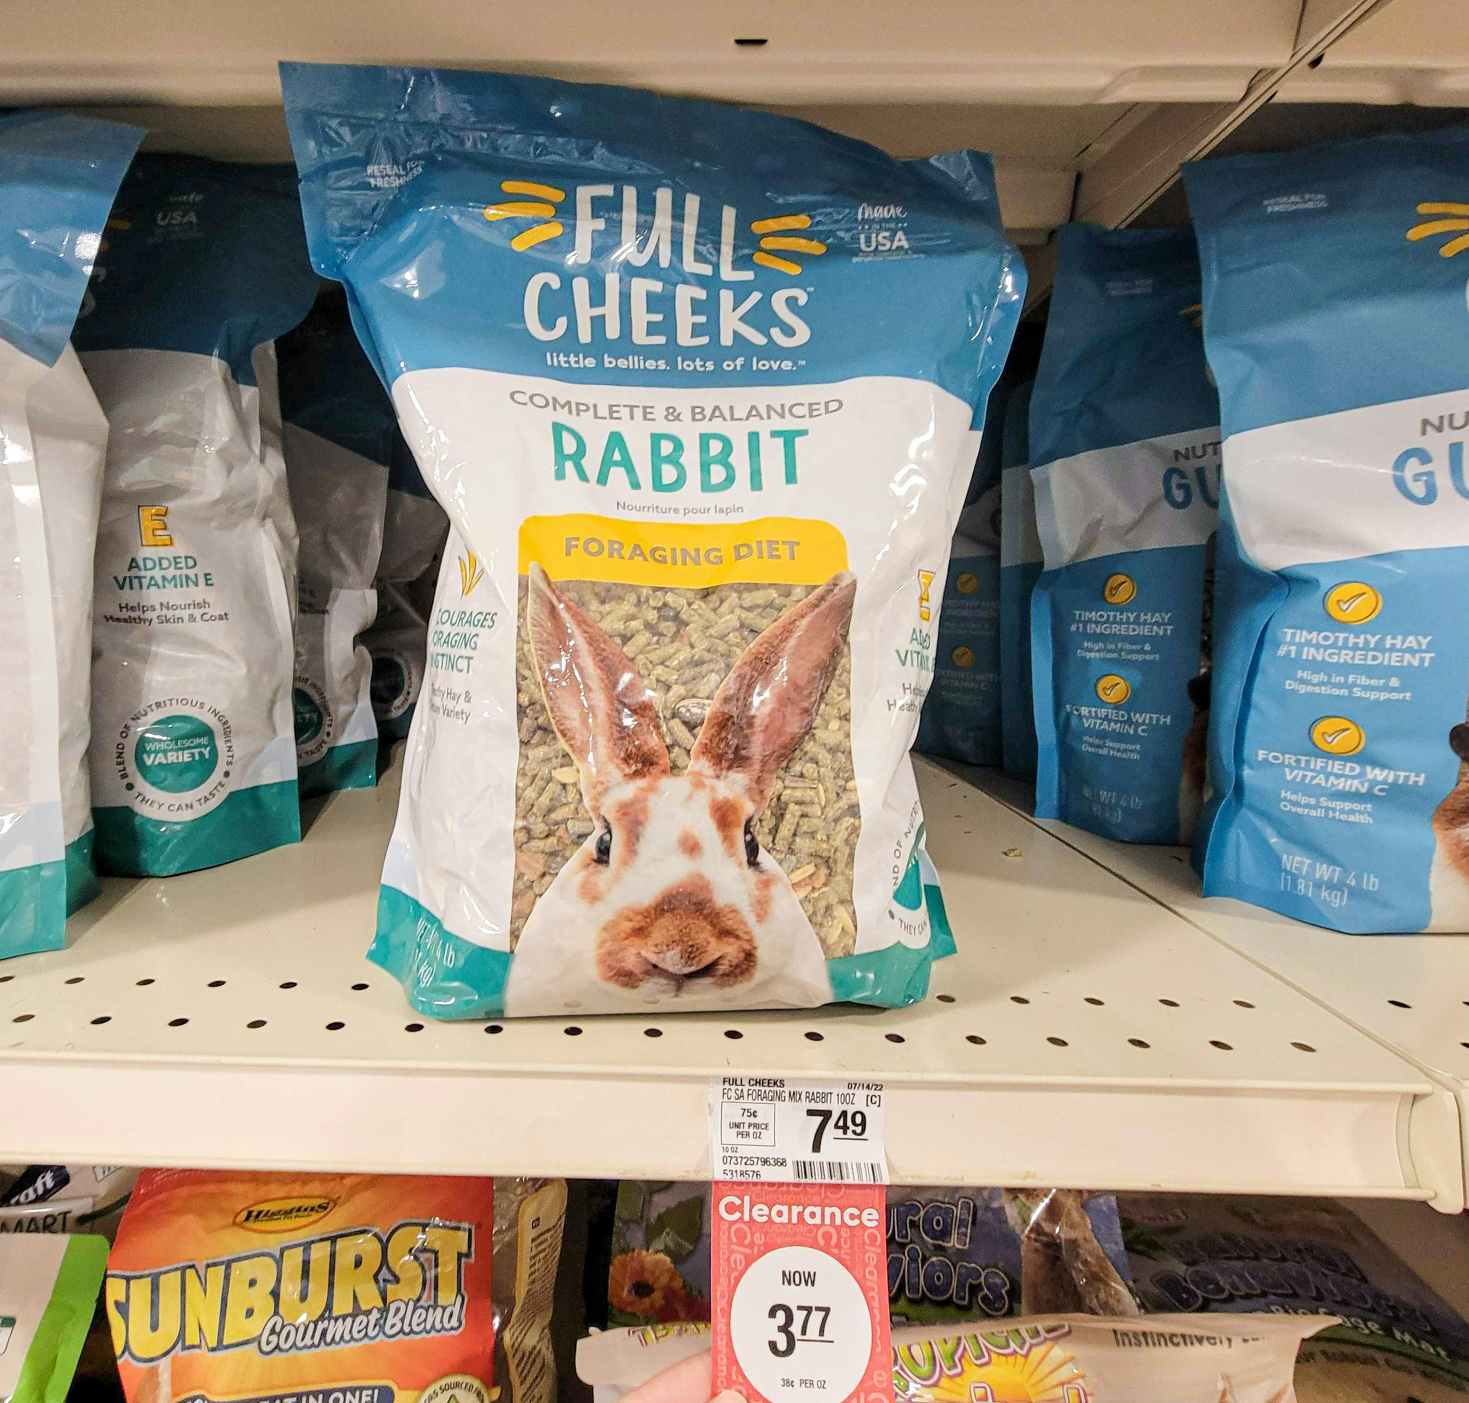 a bag of foraging diet full cheeks rabbit food on the shelf by clearance tag for $3.77